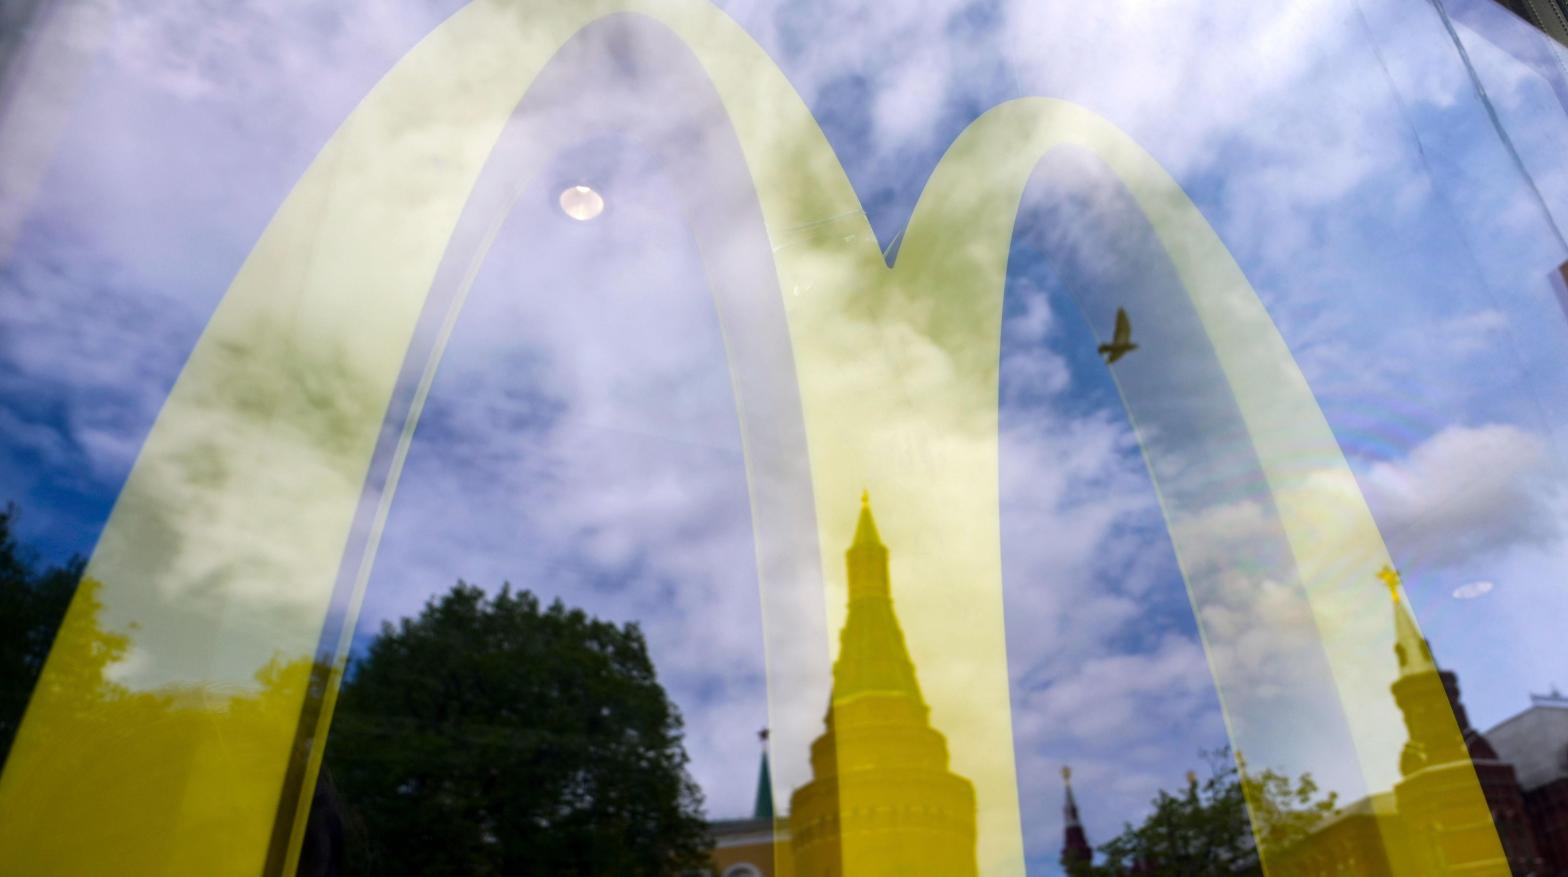 The Kremlin's towers are seen reflected in the window of a closed McDonald's restaurant in Moscow on May 16, 2022. (Photo: Natalia Kolesnikova / AFP, Getty Images)